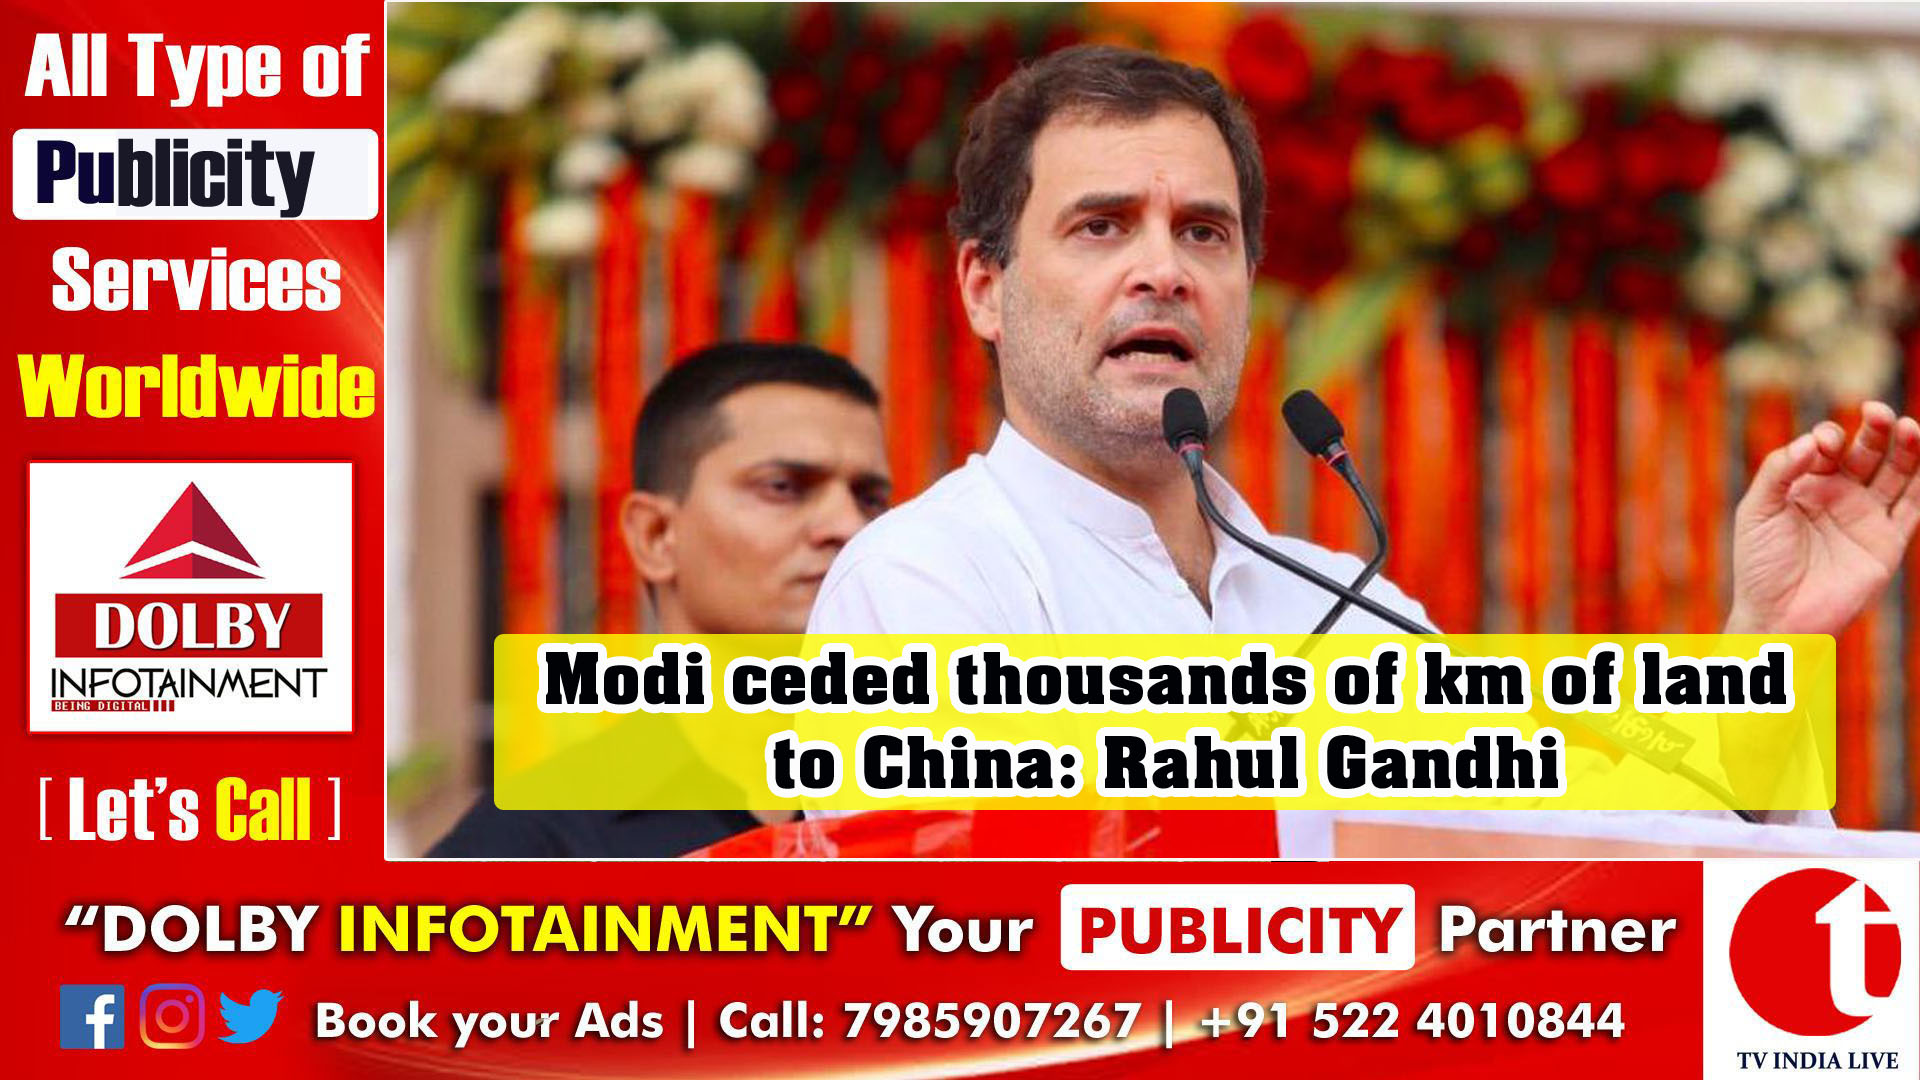 Modi ceded thousands of km of land to China: Rahul Gandhi